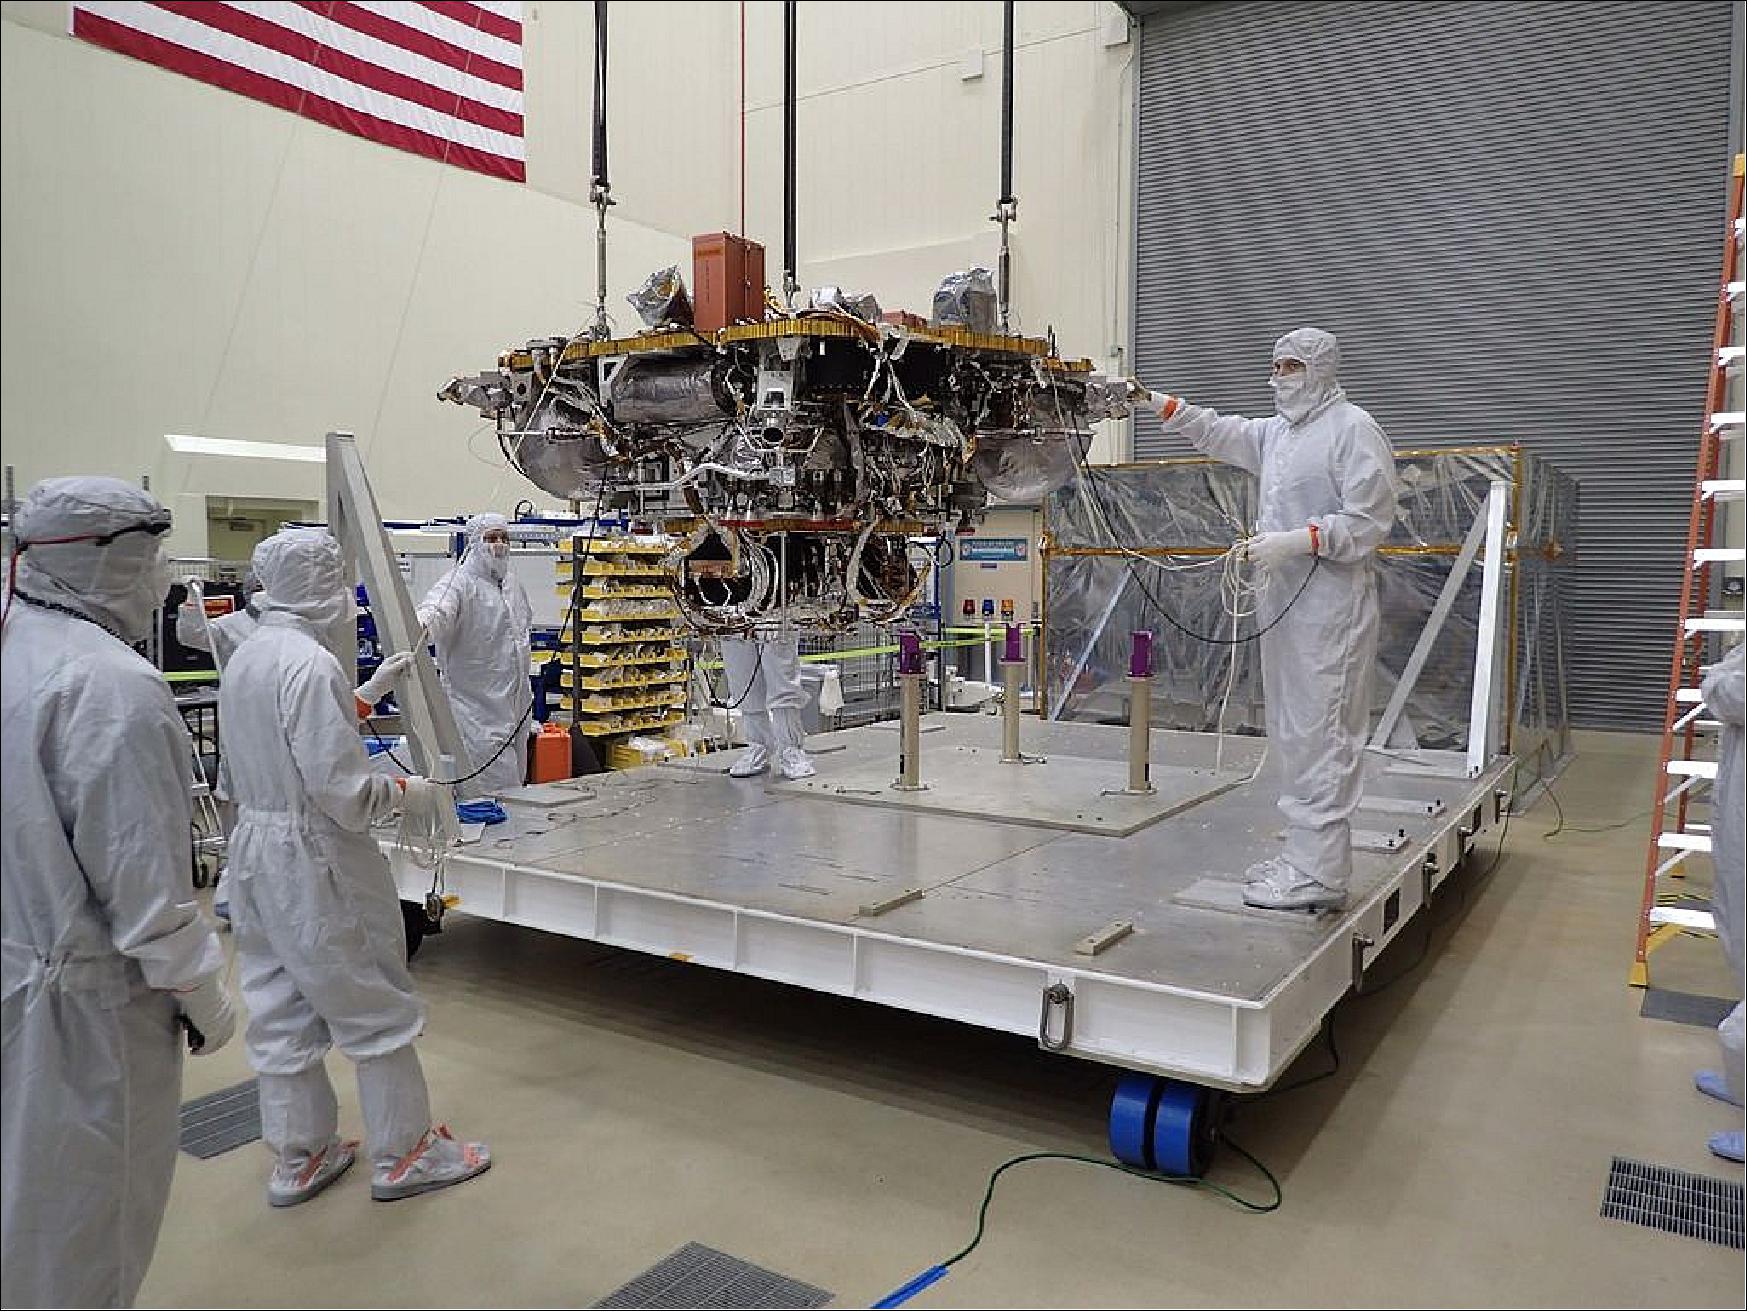 Figure 11: The Mars lander portion of NASA's InSight spacecraft is lifted from the base of a storage container in preparation for testing, in this photo taken June 20, 2017, in a Lockheed Martin clean room facility in Littleton, Colorado (image credit: NASA/JPL-Caltech, Lockheed Martin)